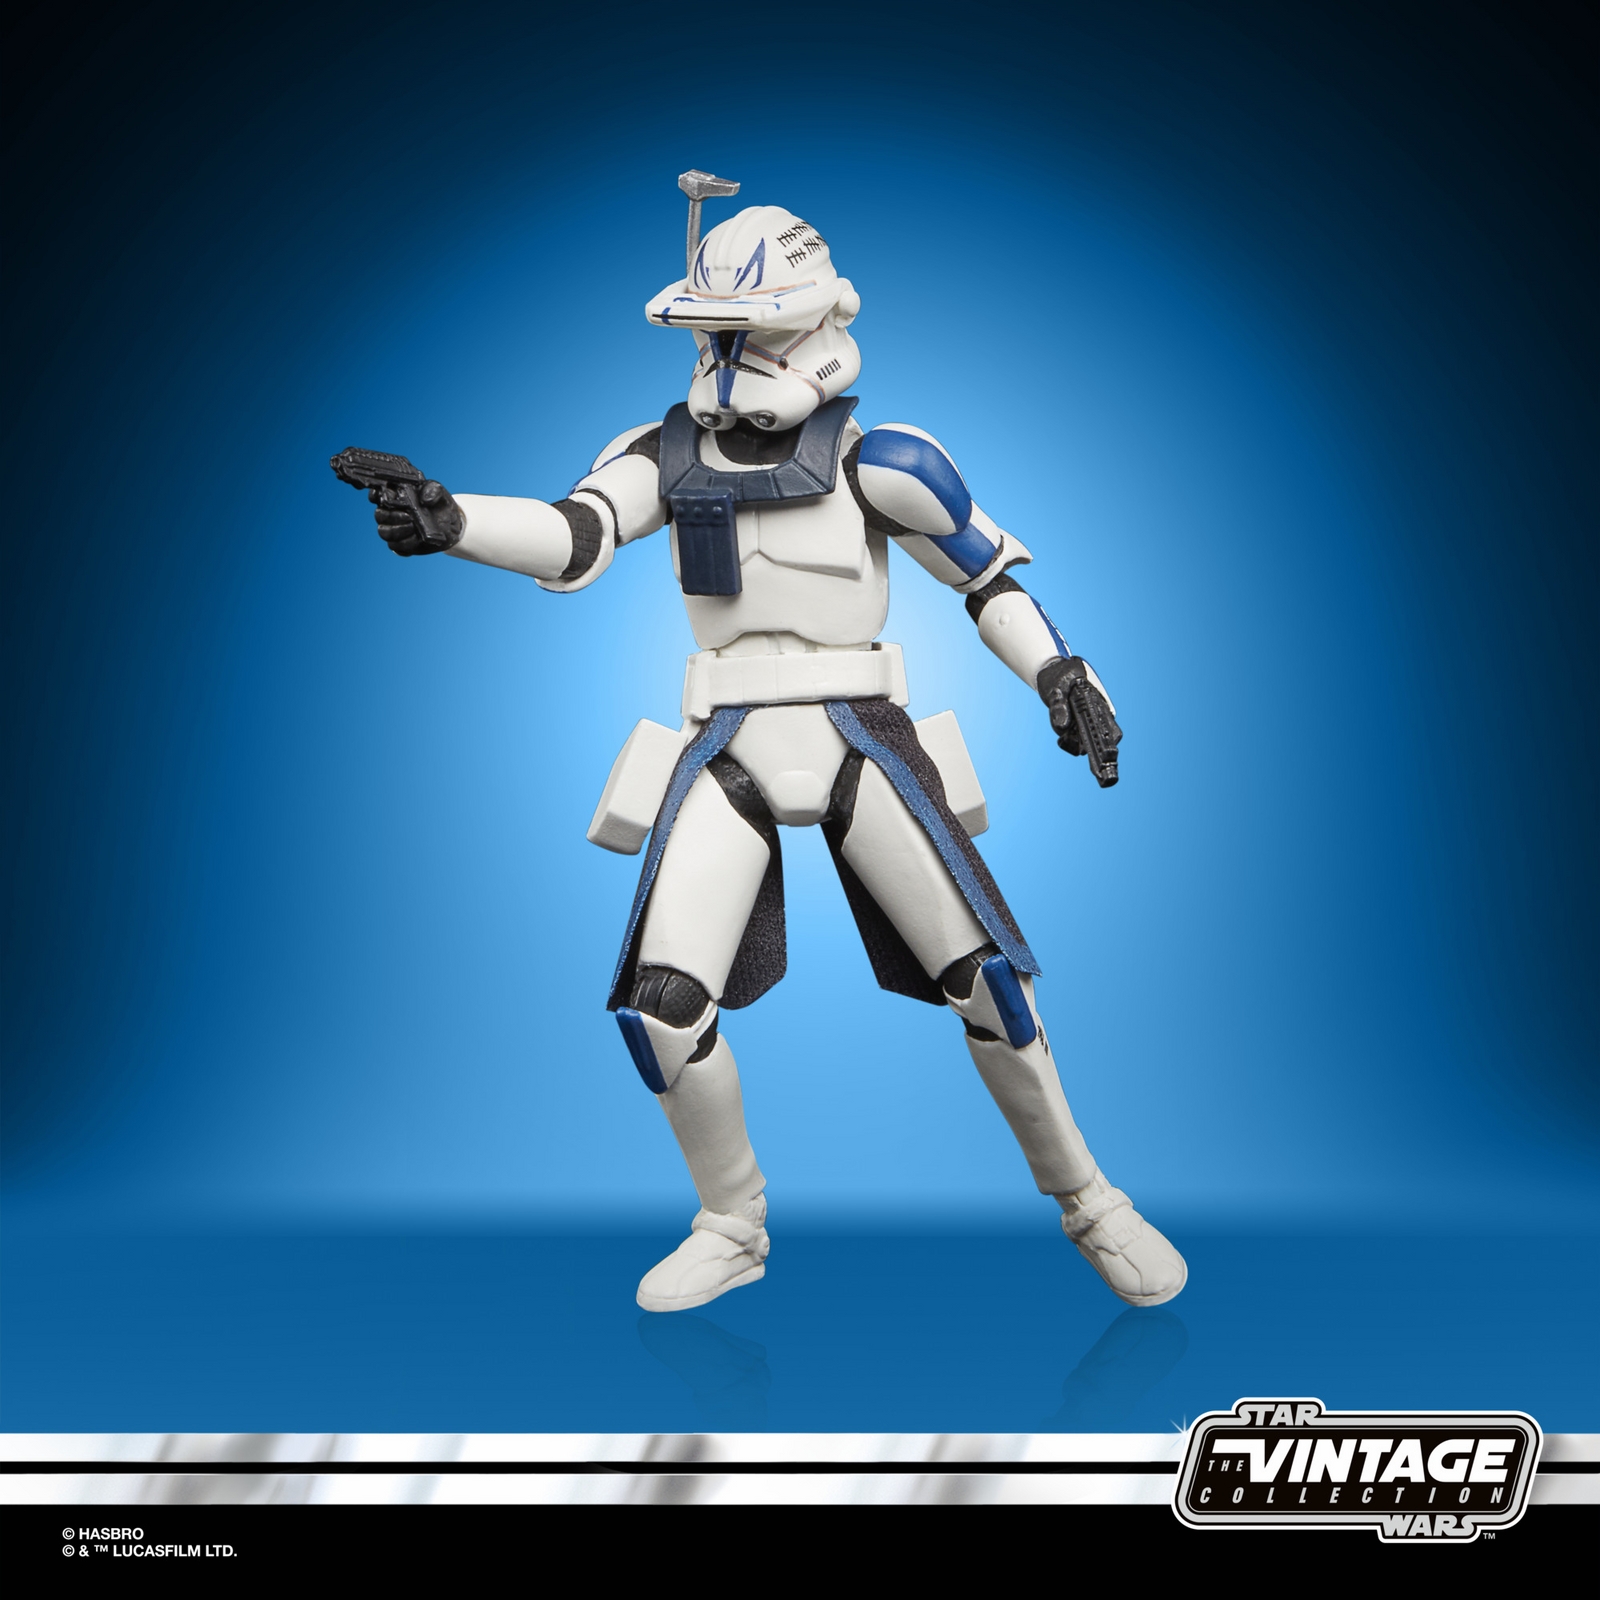 STAR WARS THE VINTAGE COLLECTION STAR WARS THE BAD BATCH Figure 4-Pack - CLONE CAPTAIN REX (1).jpg